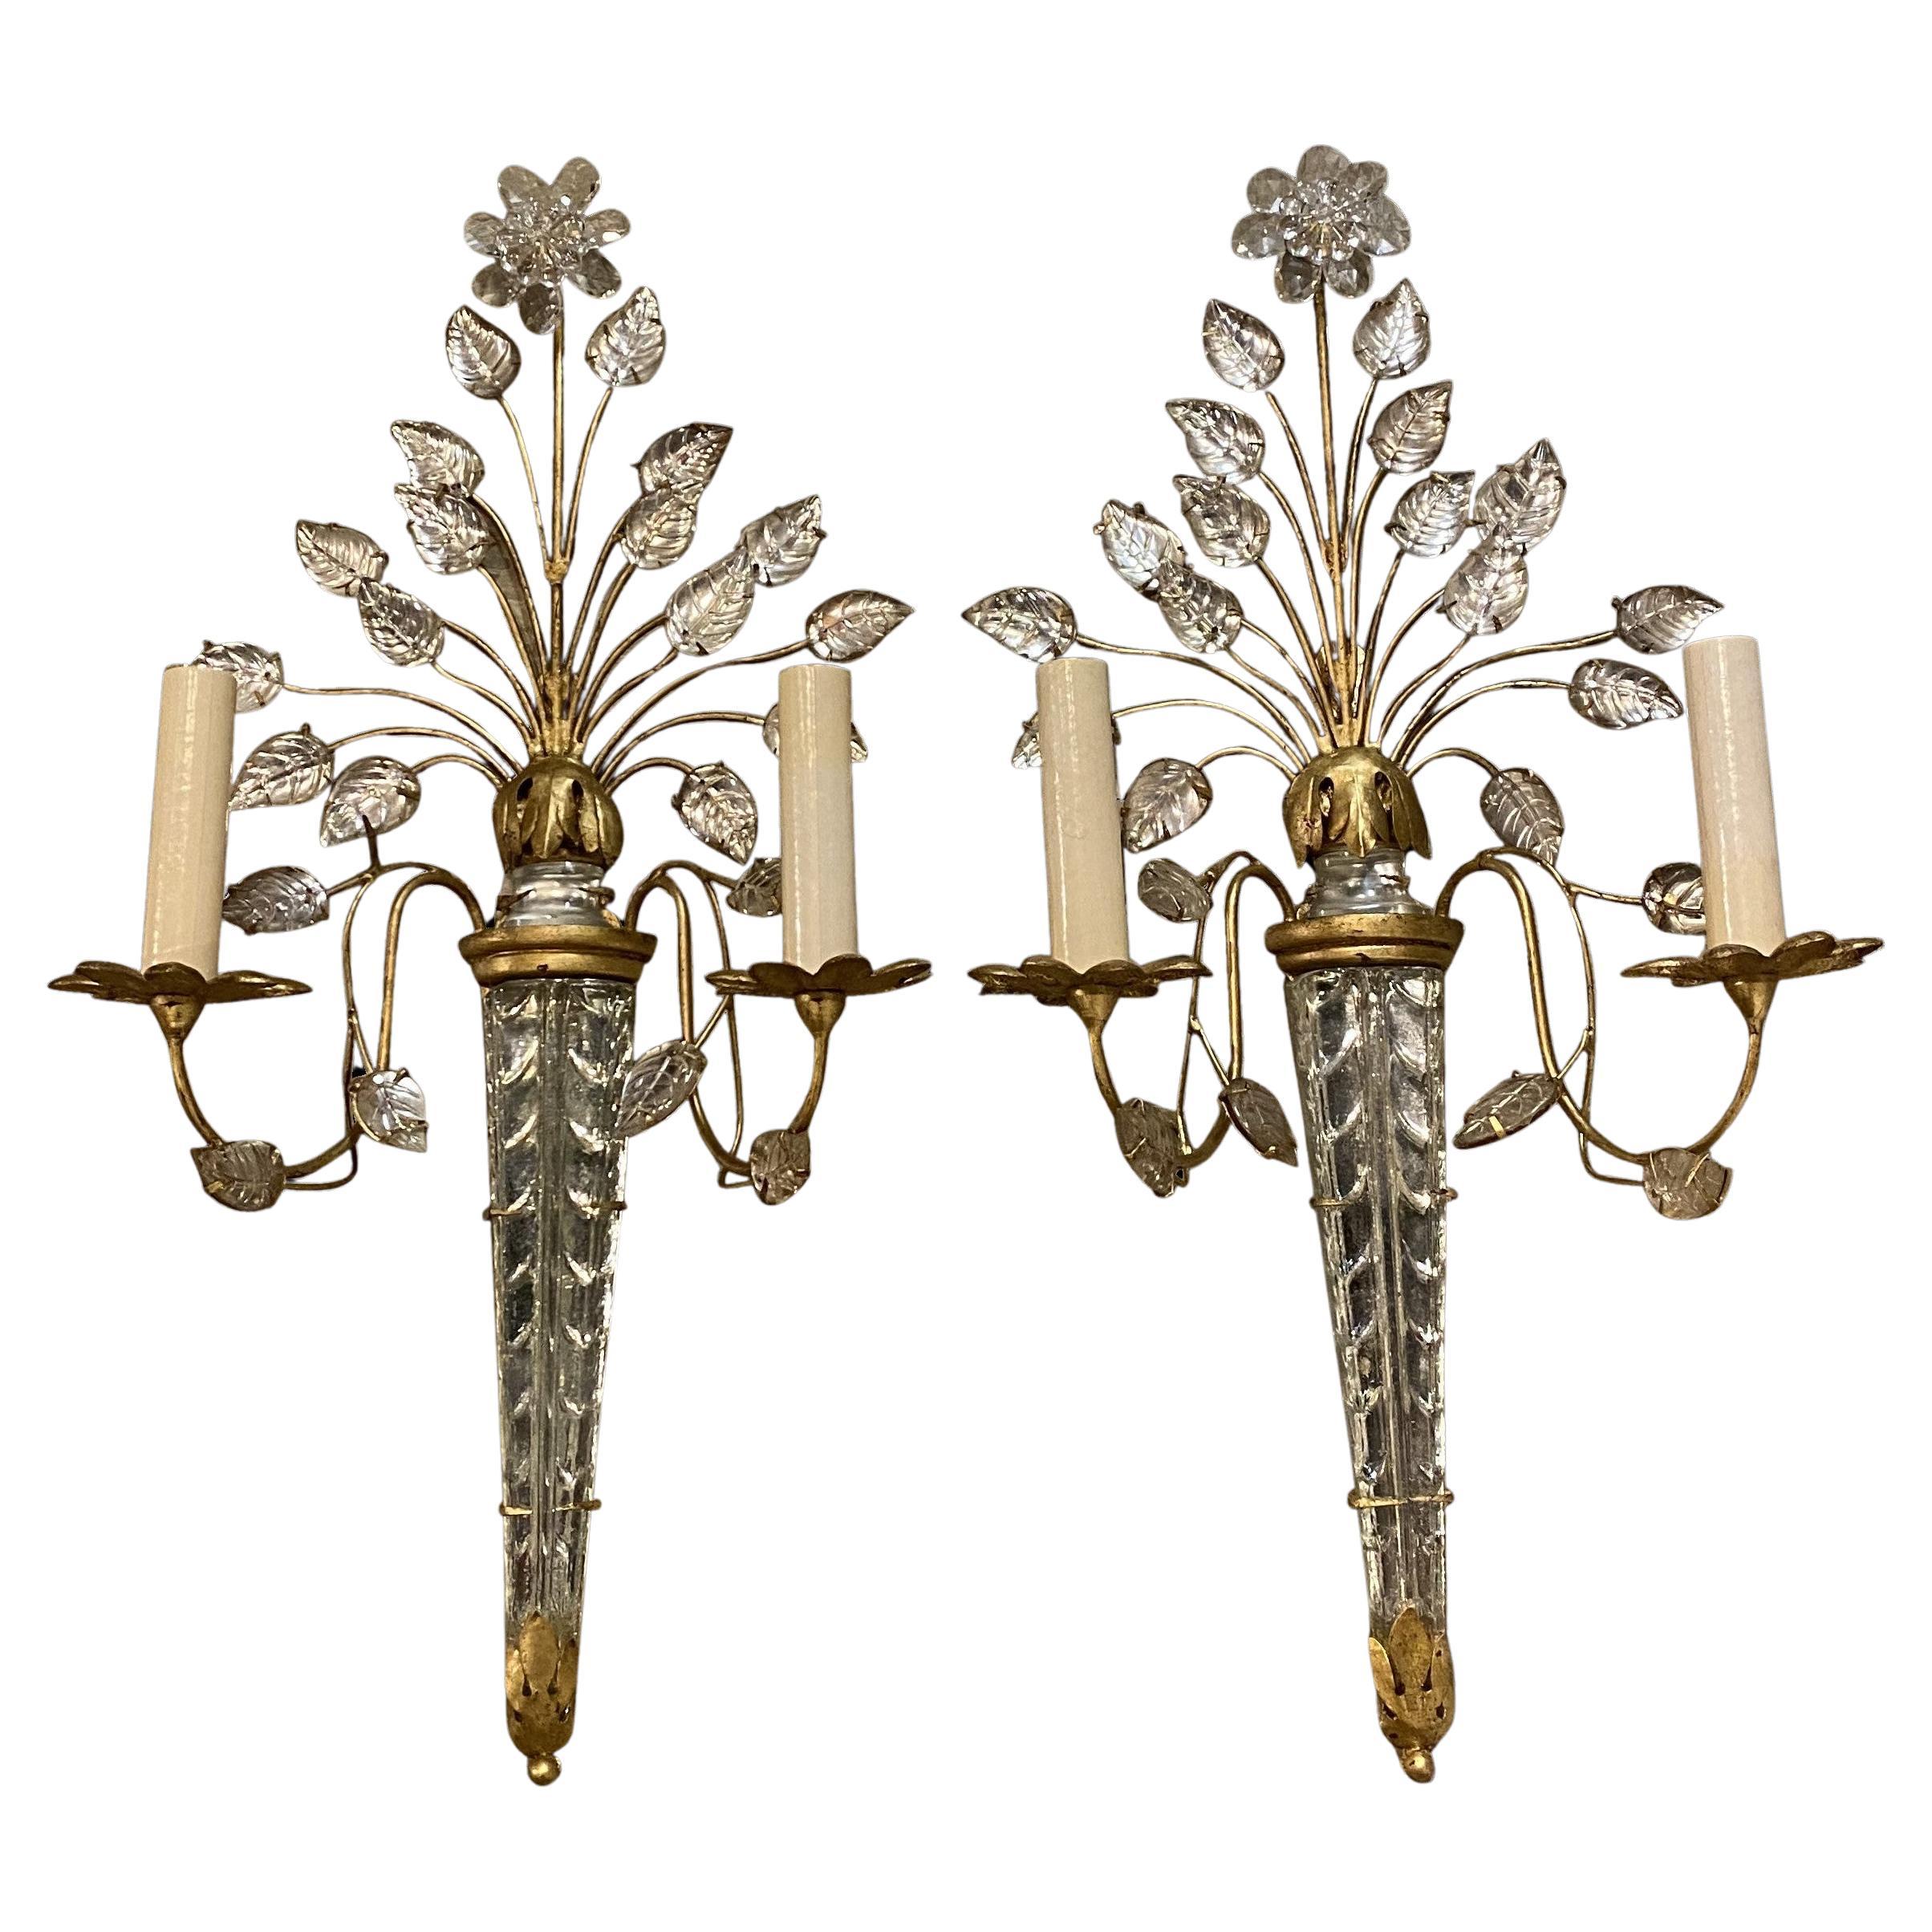 1930's French Bagues Gilt Metal Sconces with Crystal Leaves